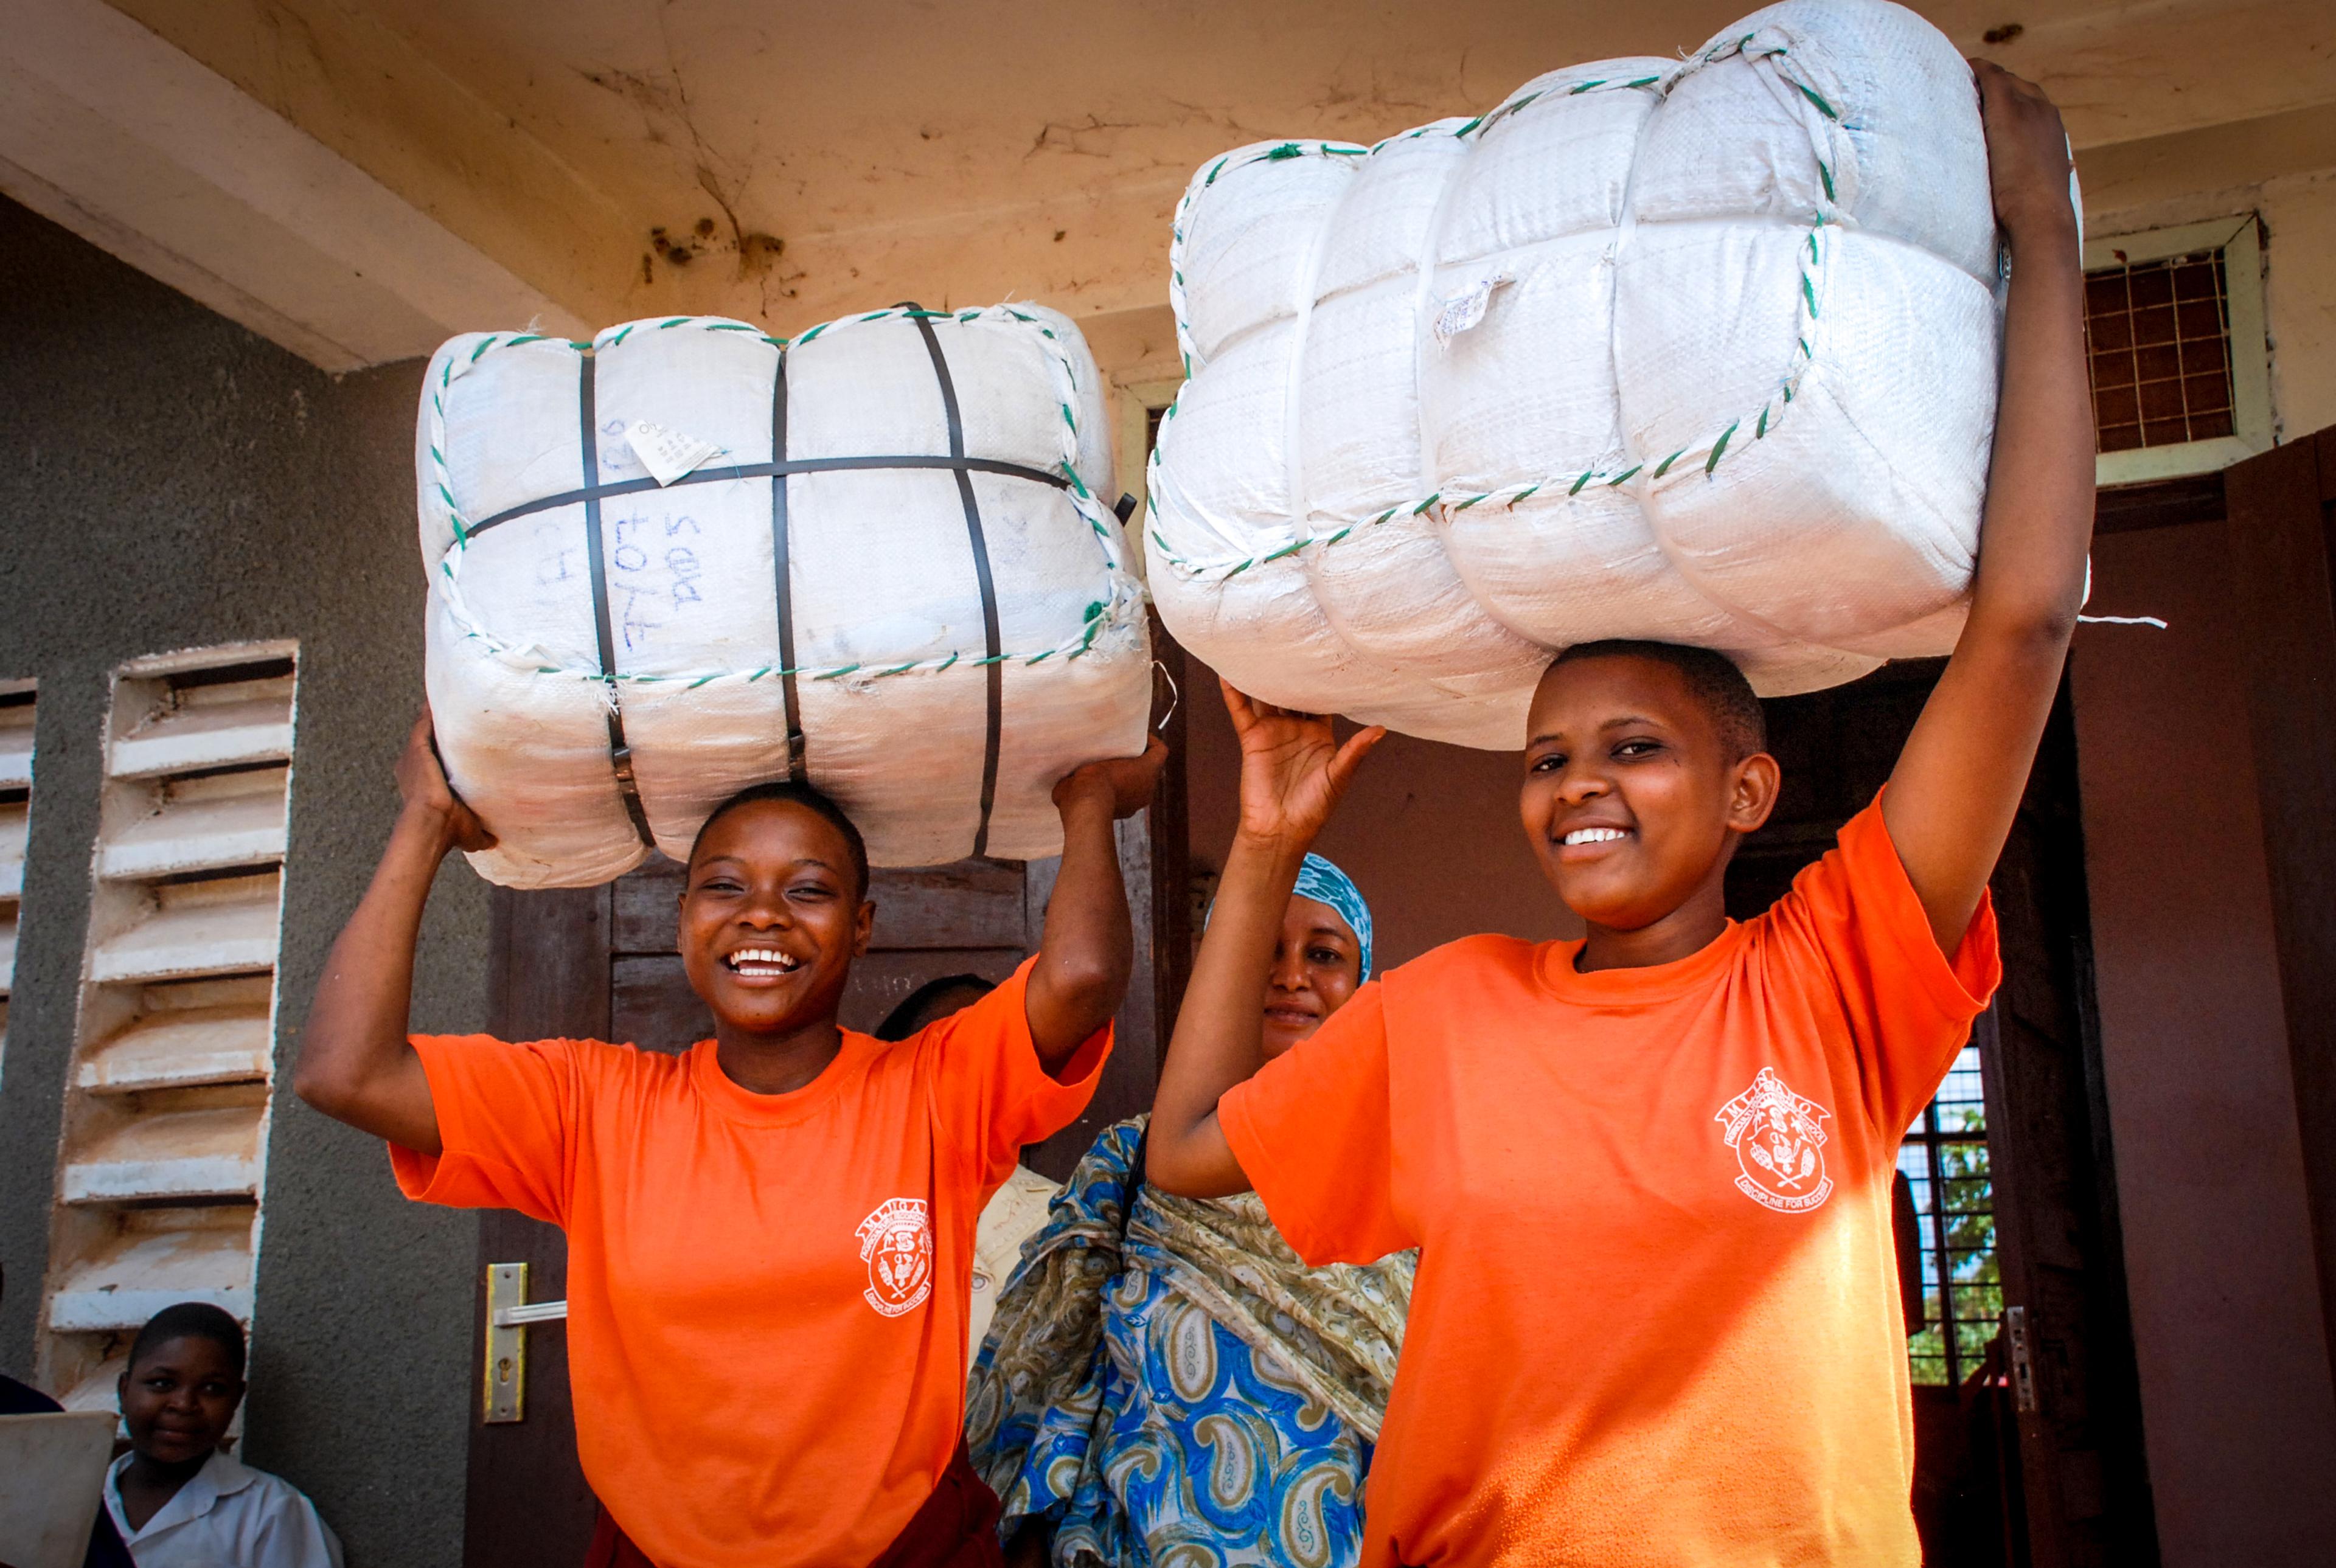 Women in Uganda holding bales of insecticide-treated bednets provided by the Against Malaria Foundation, one of Giving What We Can's Top Charities.